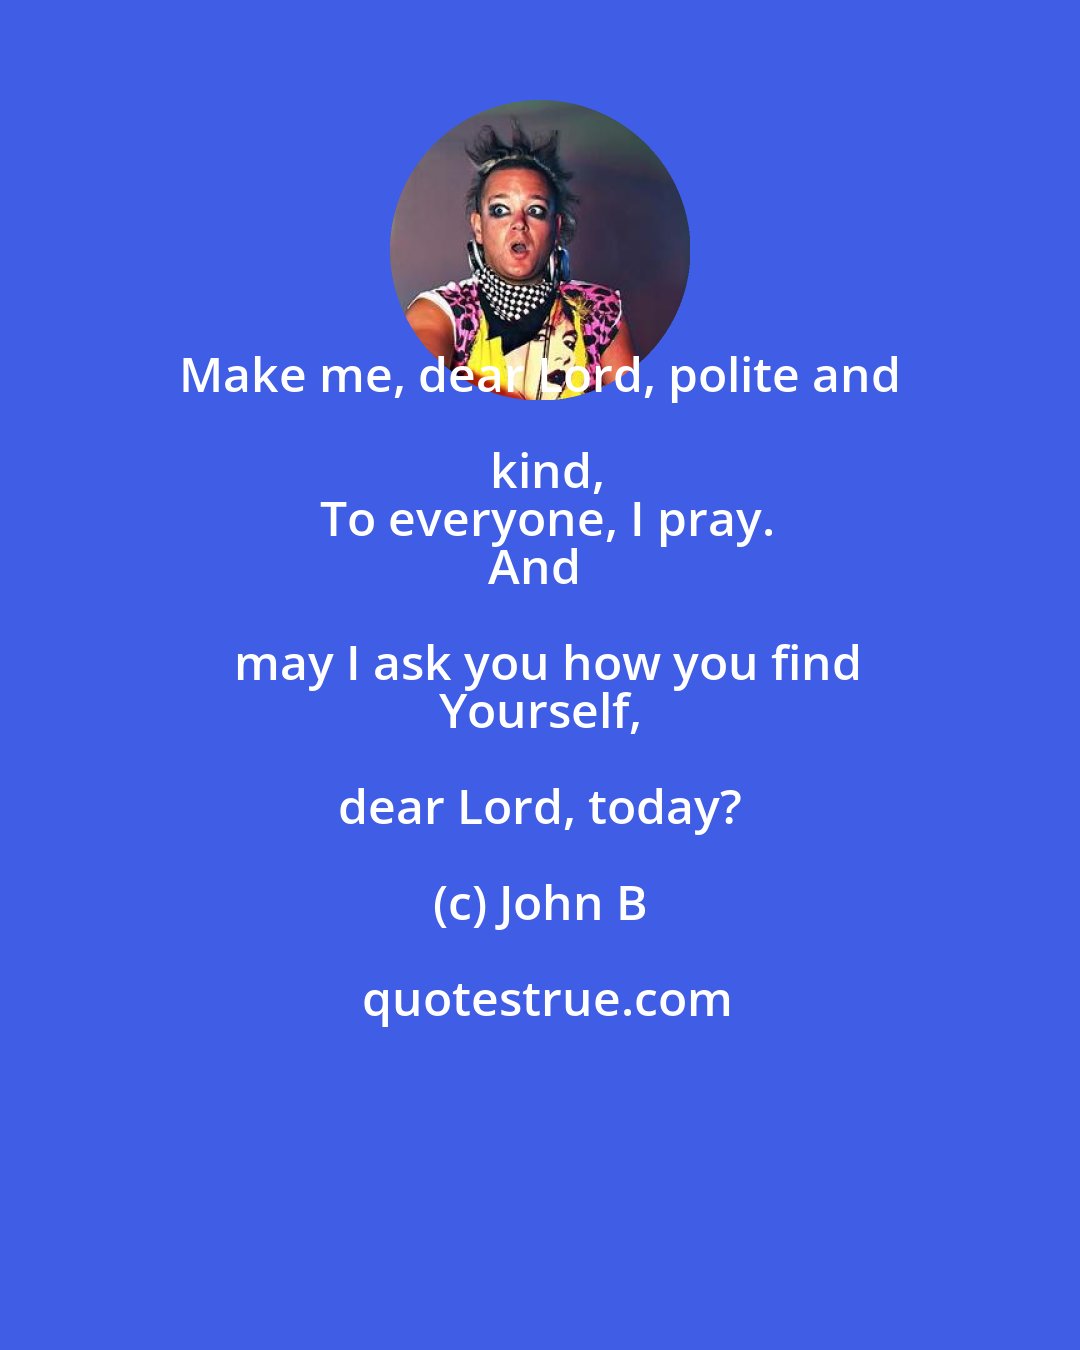 John B: Make me, dear Lord, polite and kind,
 To everyone, I pray.
And may I ask you how you find
 Yourself, dear Lord, today?